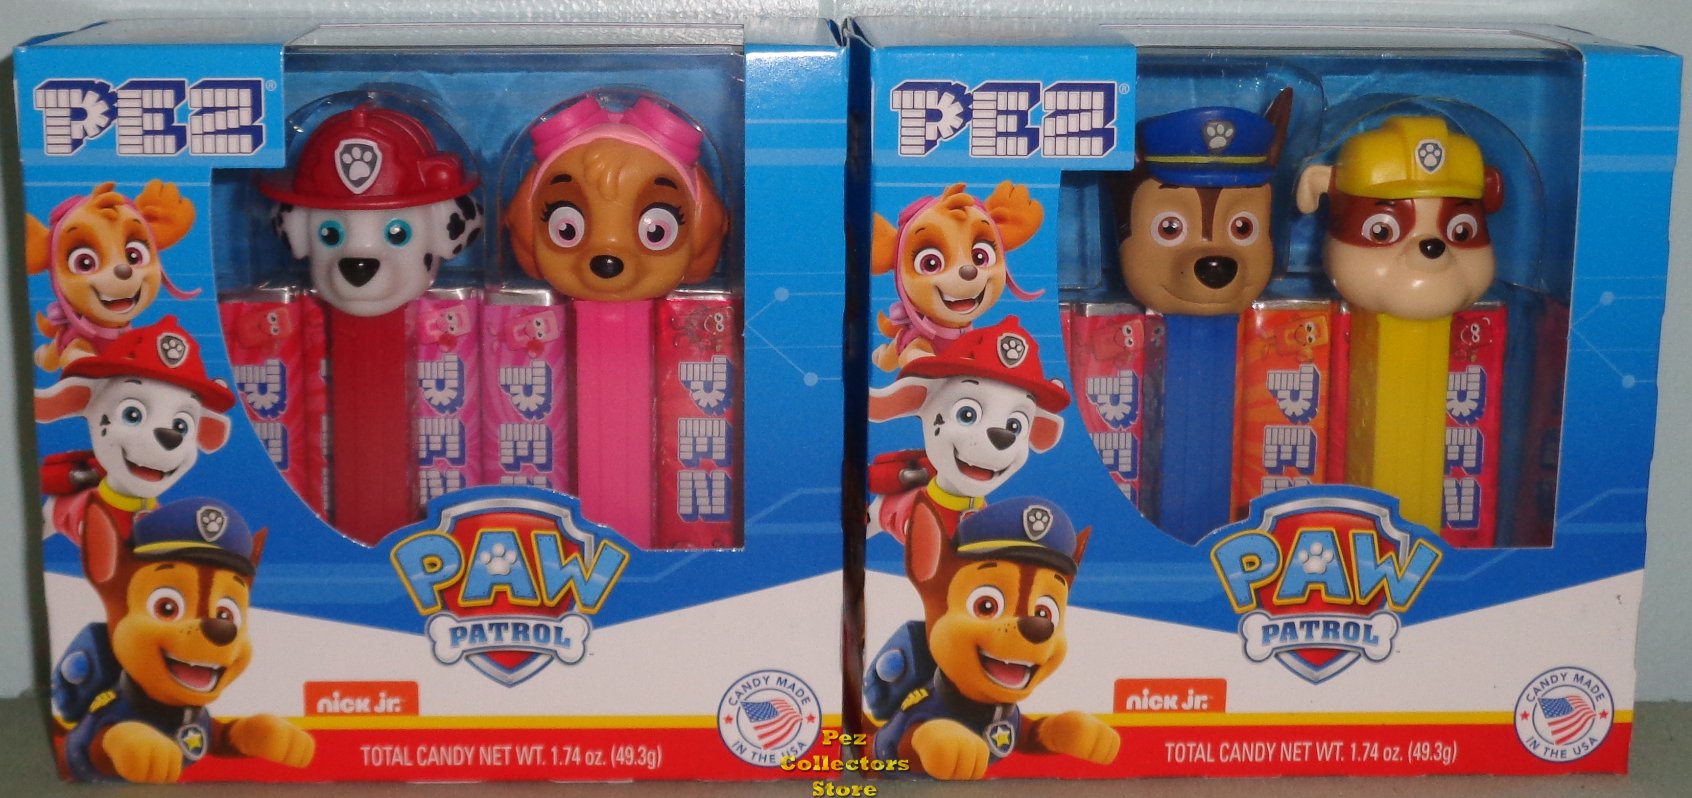 Modal Additional Images for Paw Patrol Pez Twin Pack with Chase and Skye